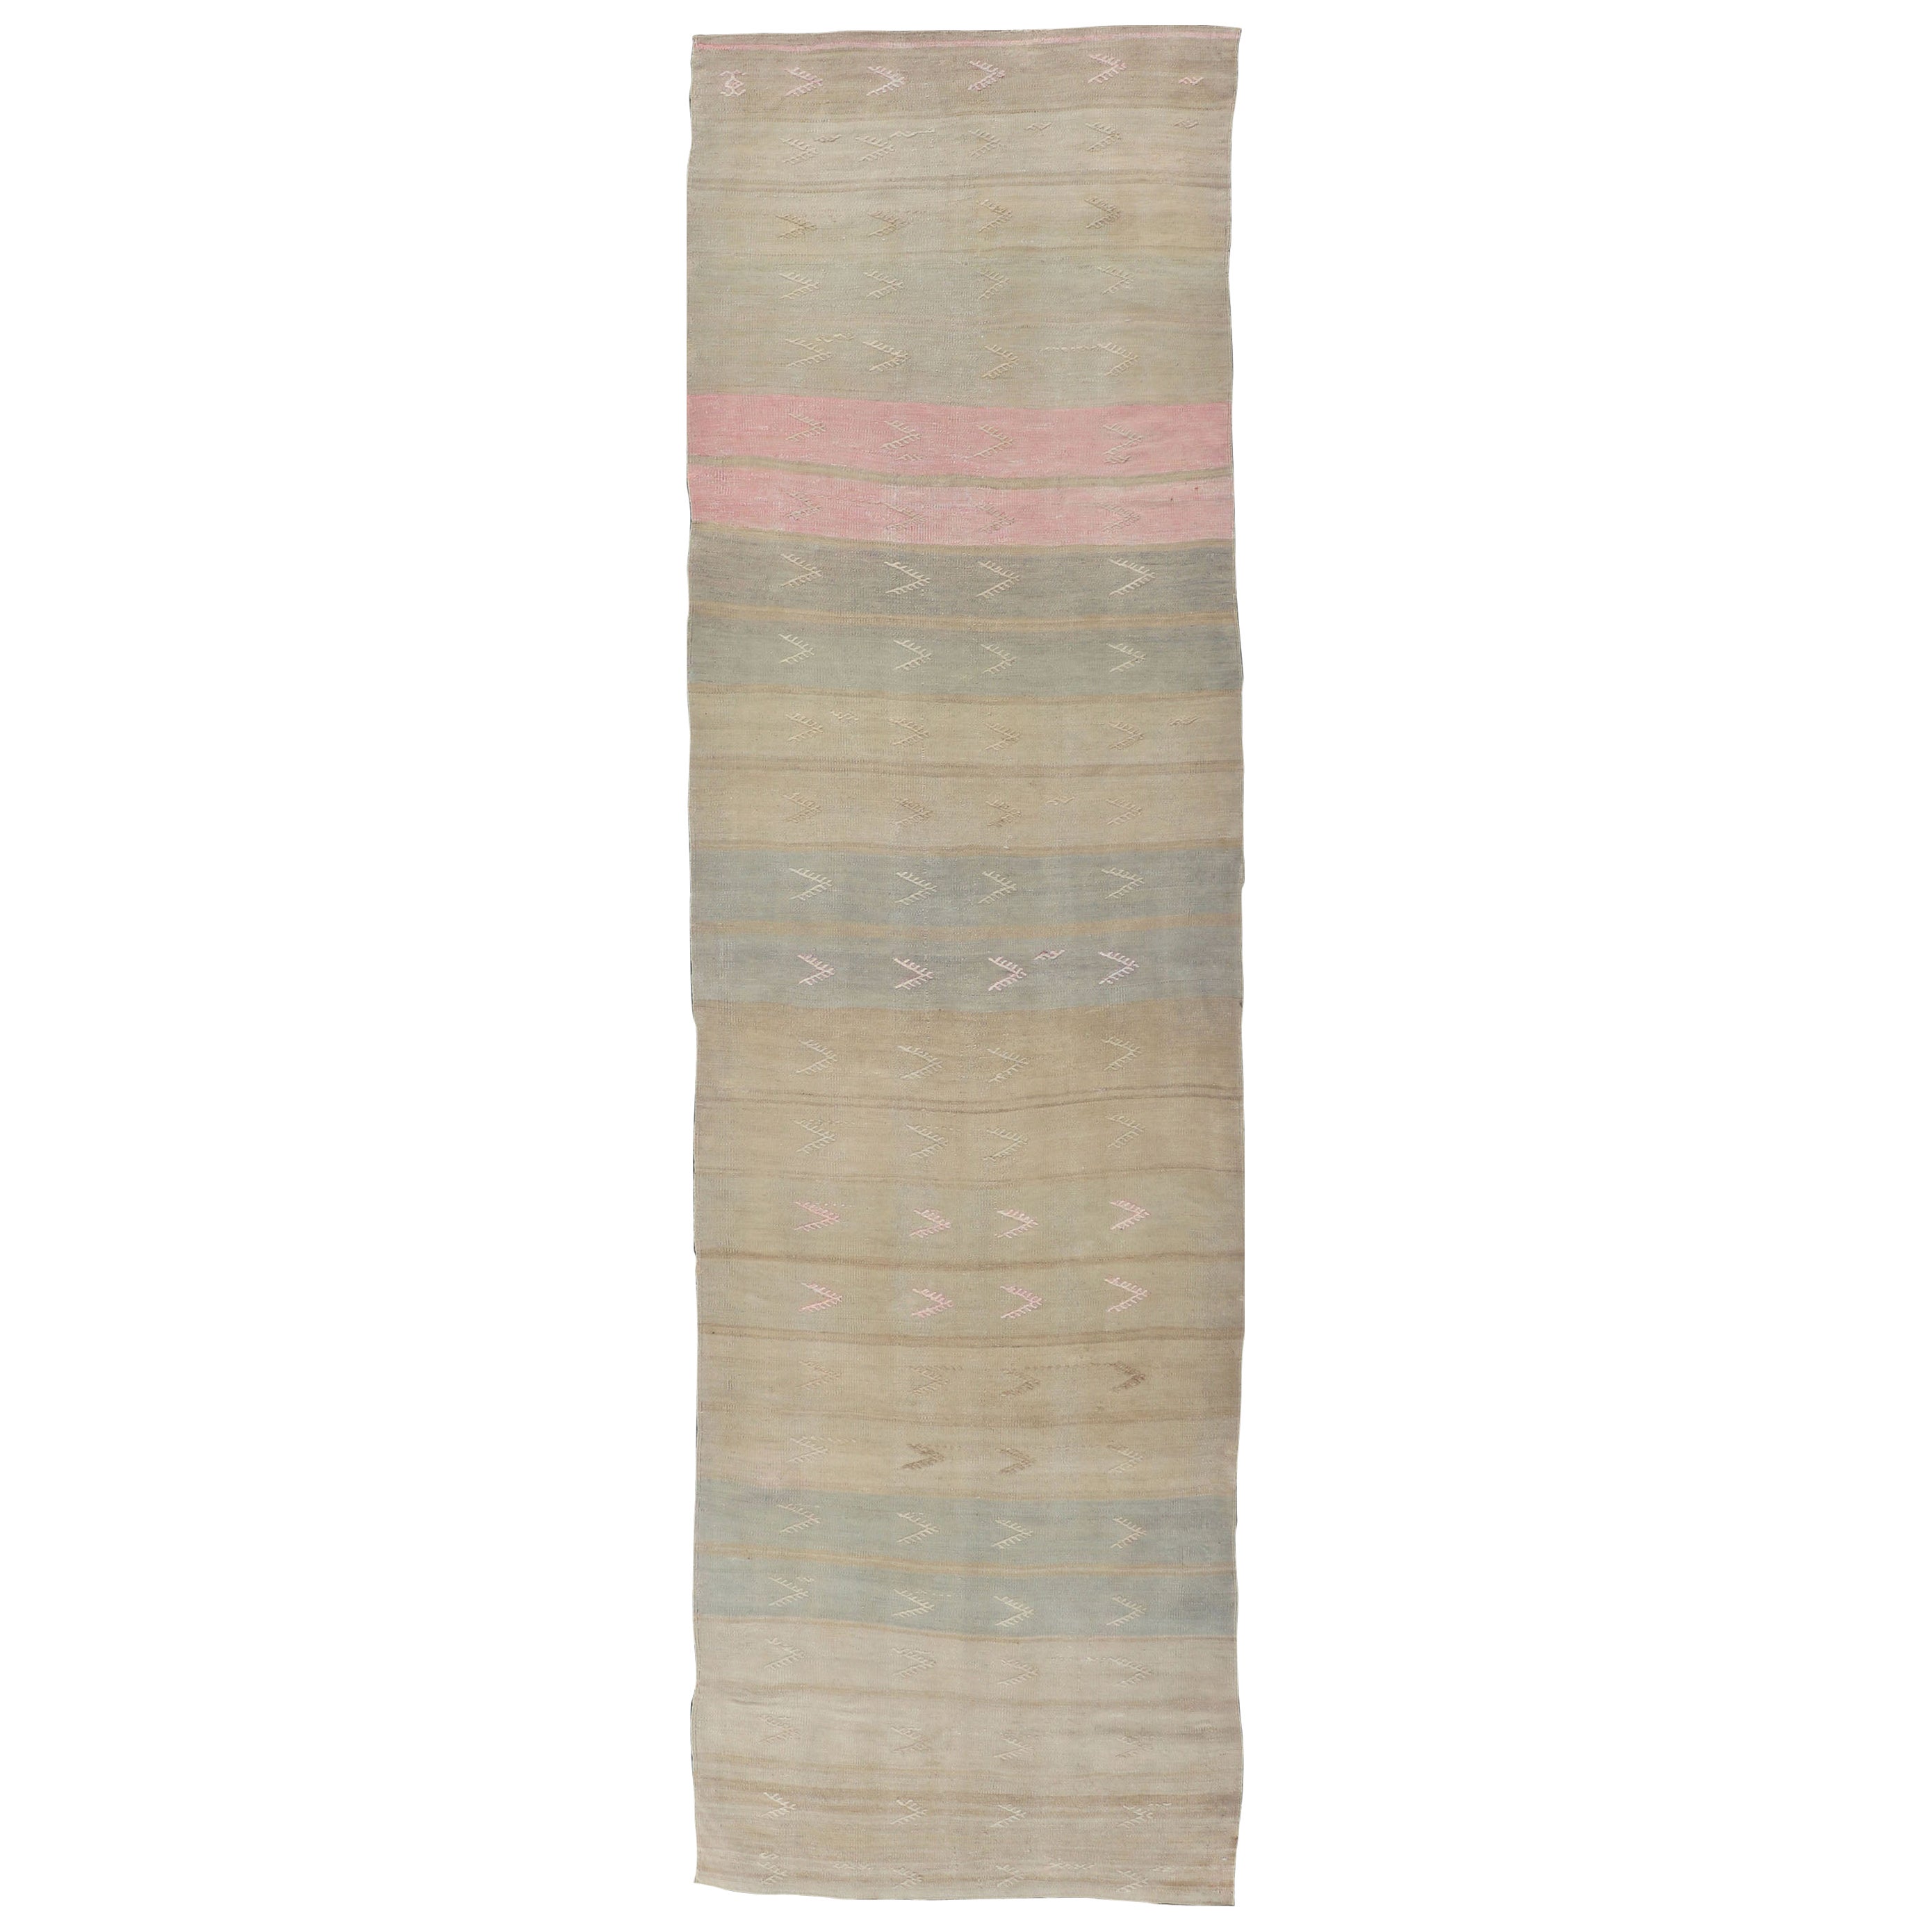 Vintage Kilim Runner with Stripes and Geometric Tribal Motifs in Light Tones